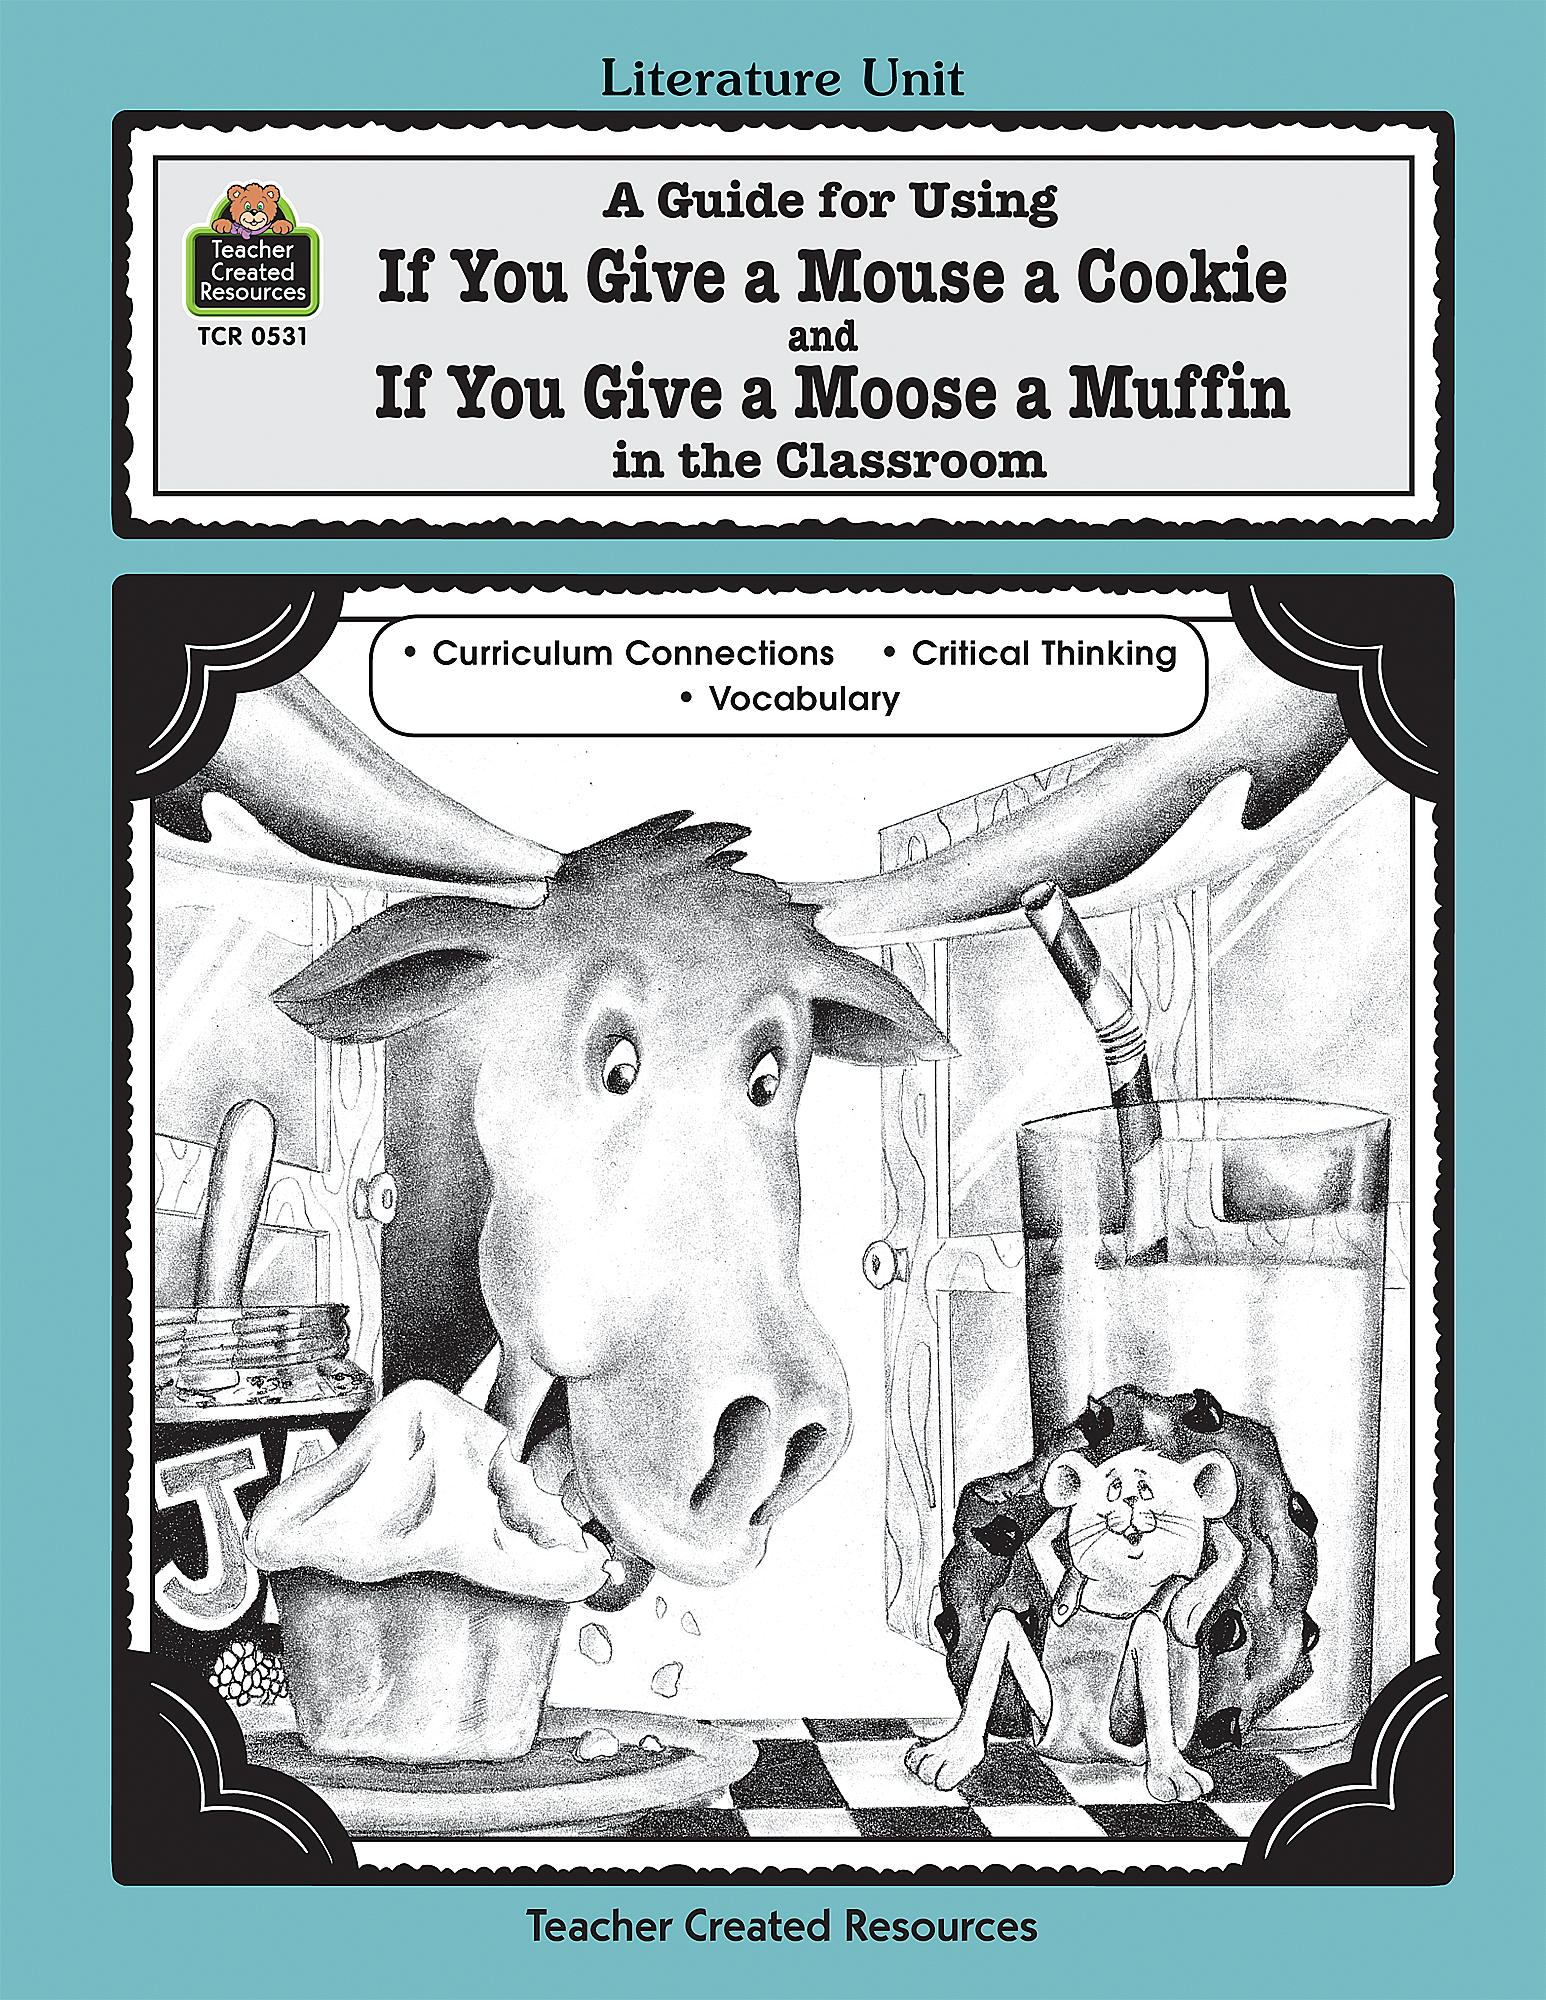 Lit. Unit: If You Give a Mouse a Cookie and If You Give a Moose a Muffin